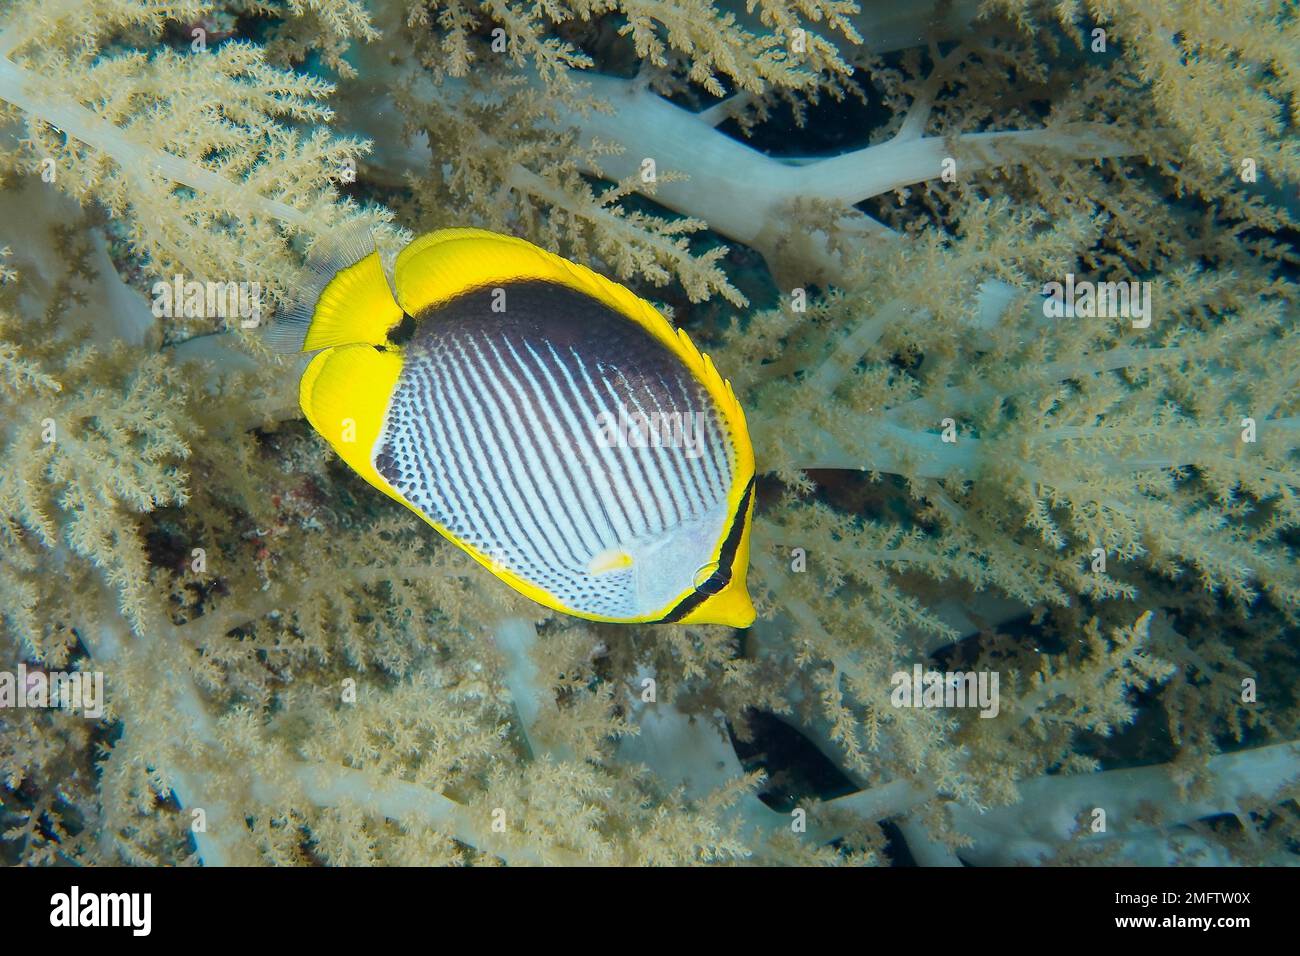 Blackback butterflyfish (Chaetodon melannotus) in broccoli tree (Litophyton arboreum) . Dive site Small Brother, Brother Islands, Egypt, Red Sea Stock Photo